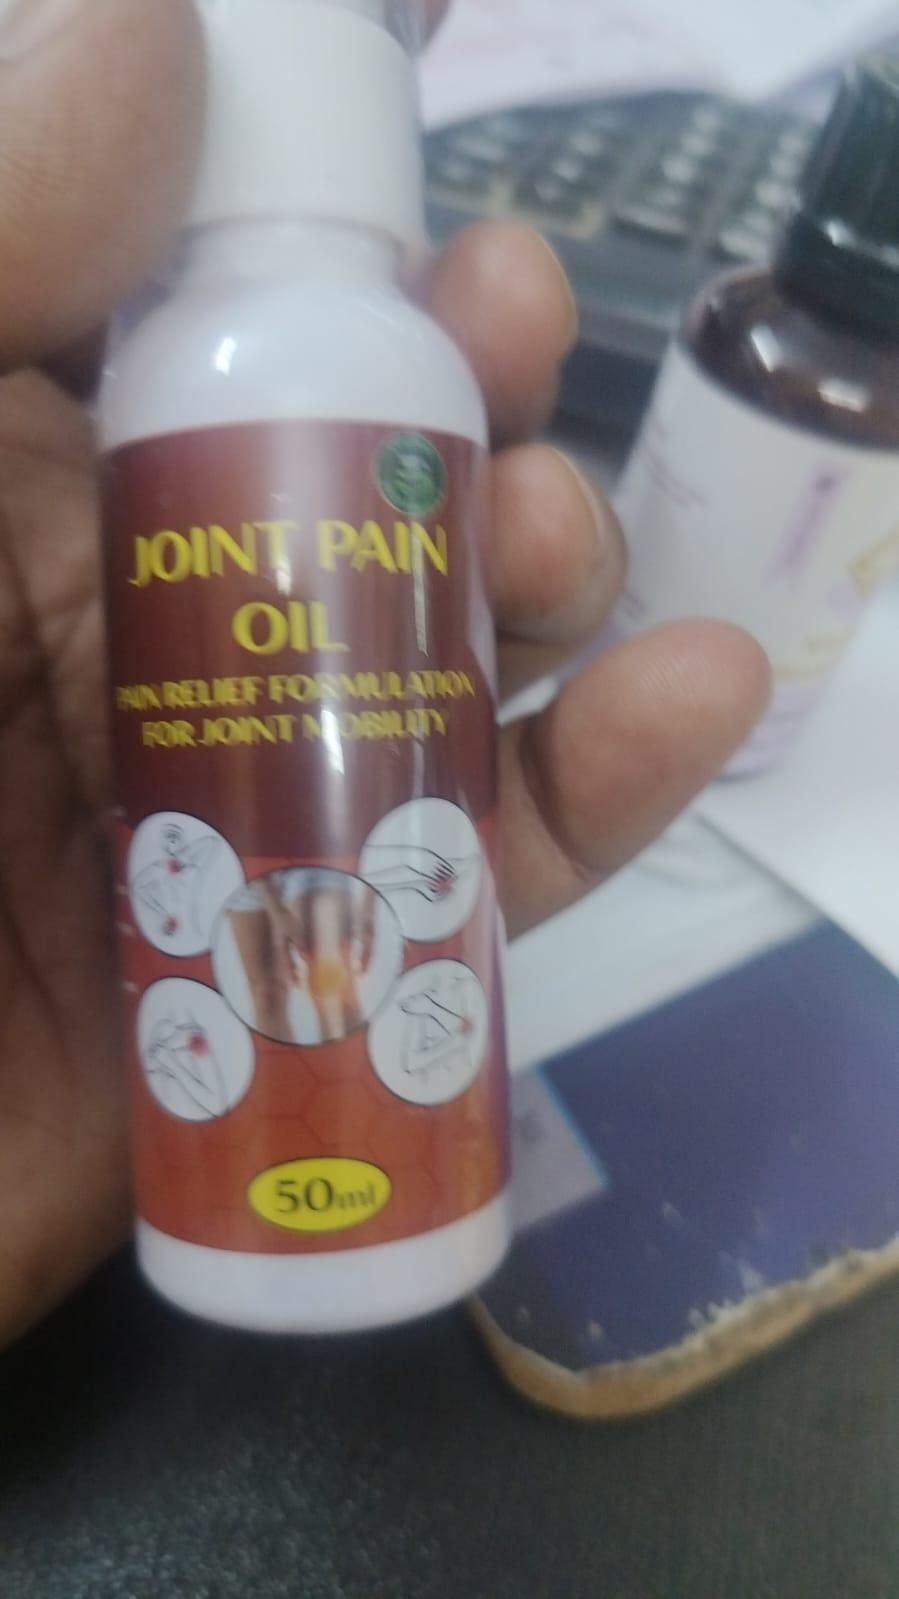 Joint Pain Oil Pack of 2